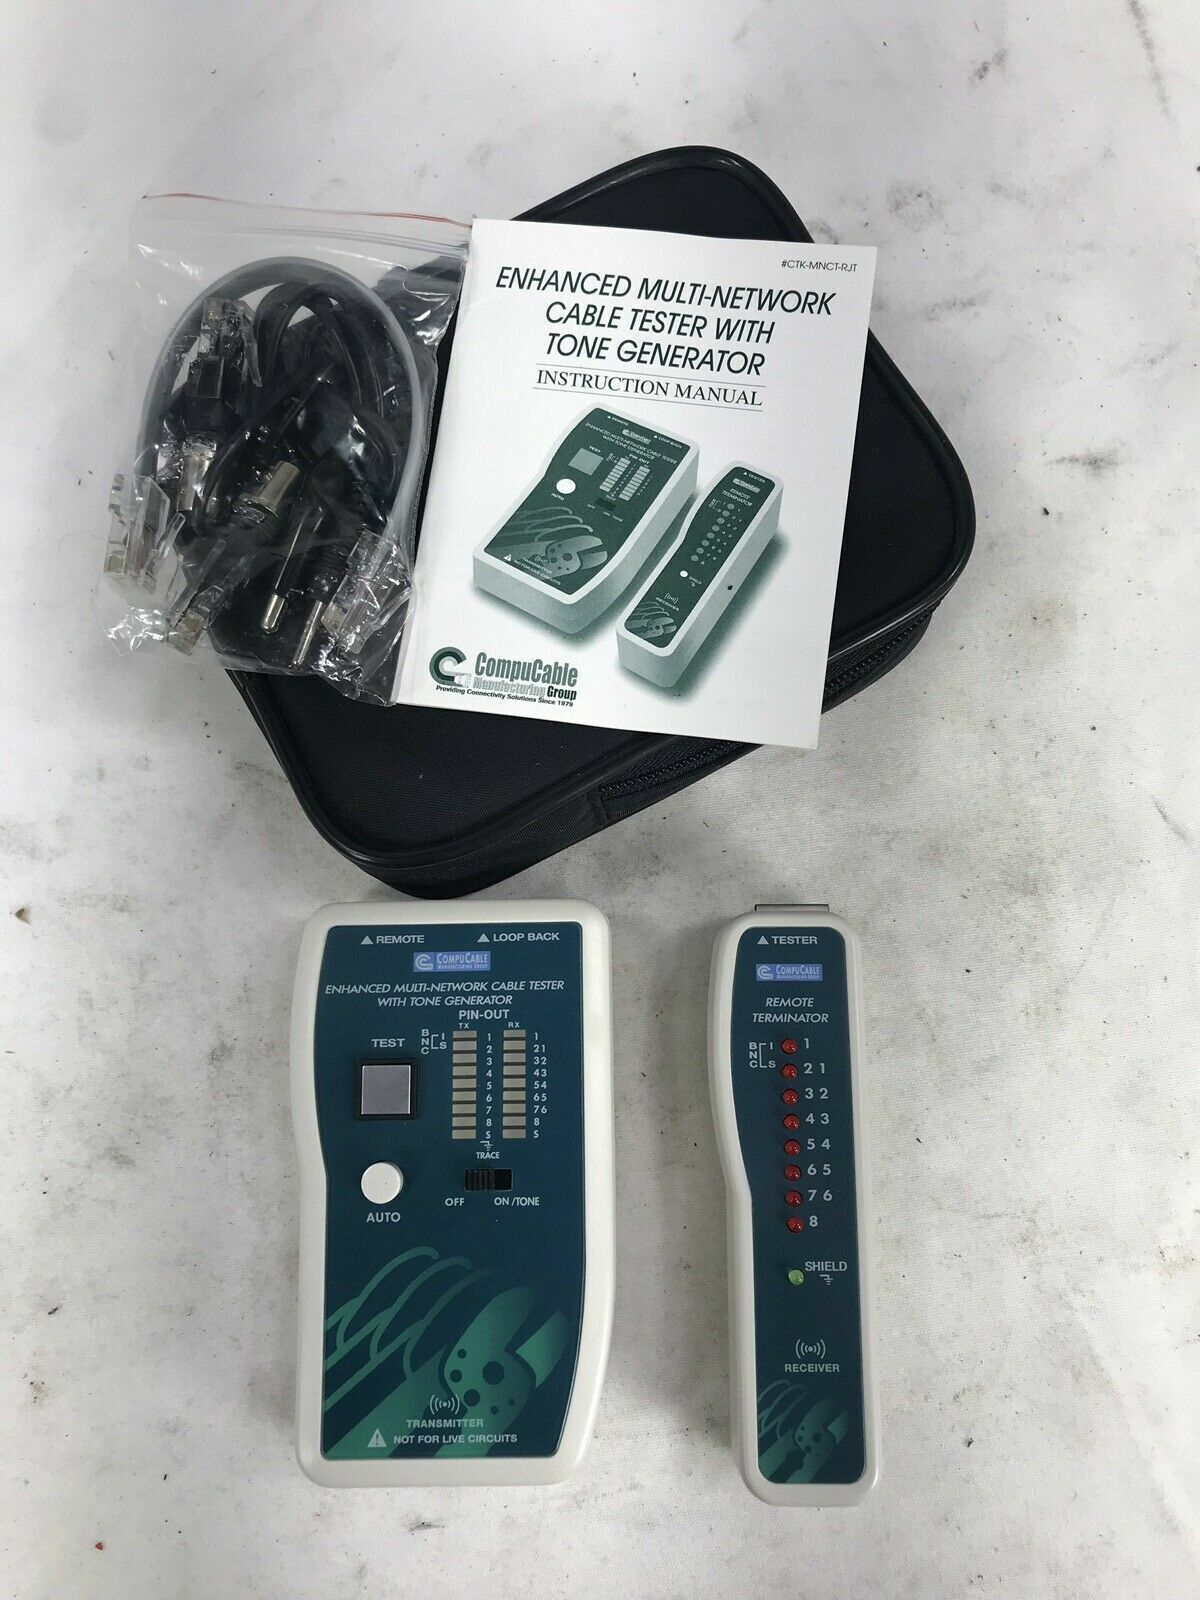 COMPUCABLE MANUFACTURING, CTK-MNCT-RJT, MULTI NETWORK CABLE TESTER - PRE-OWNED